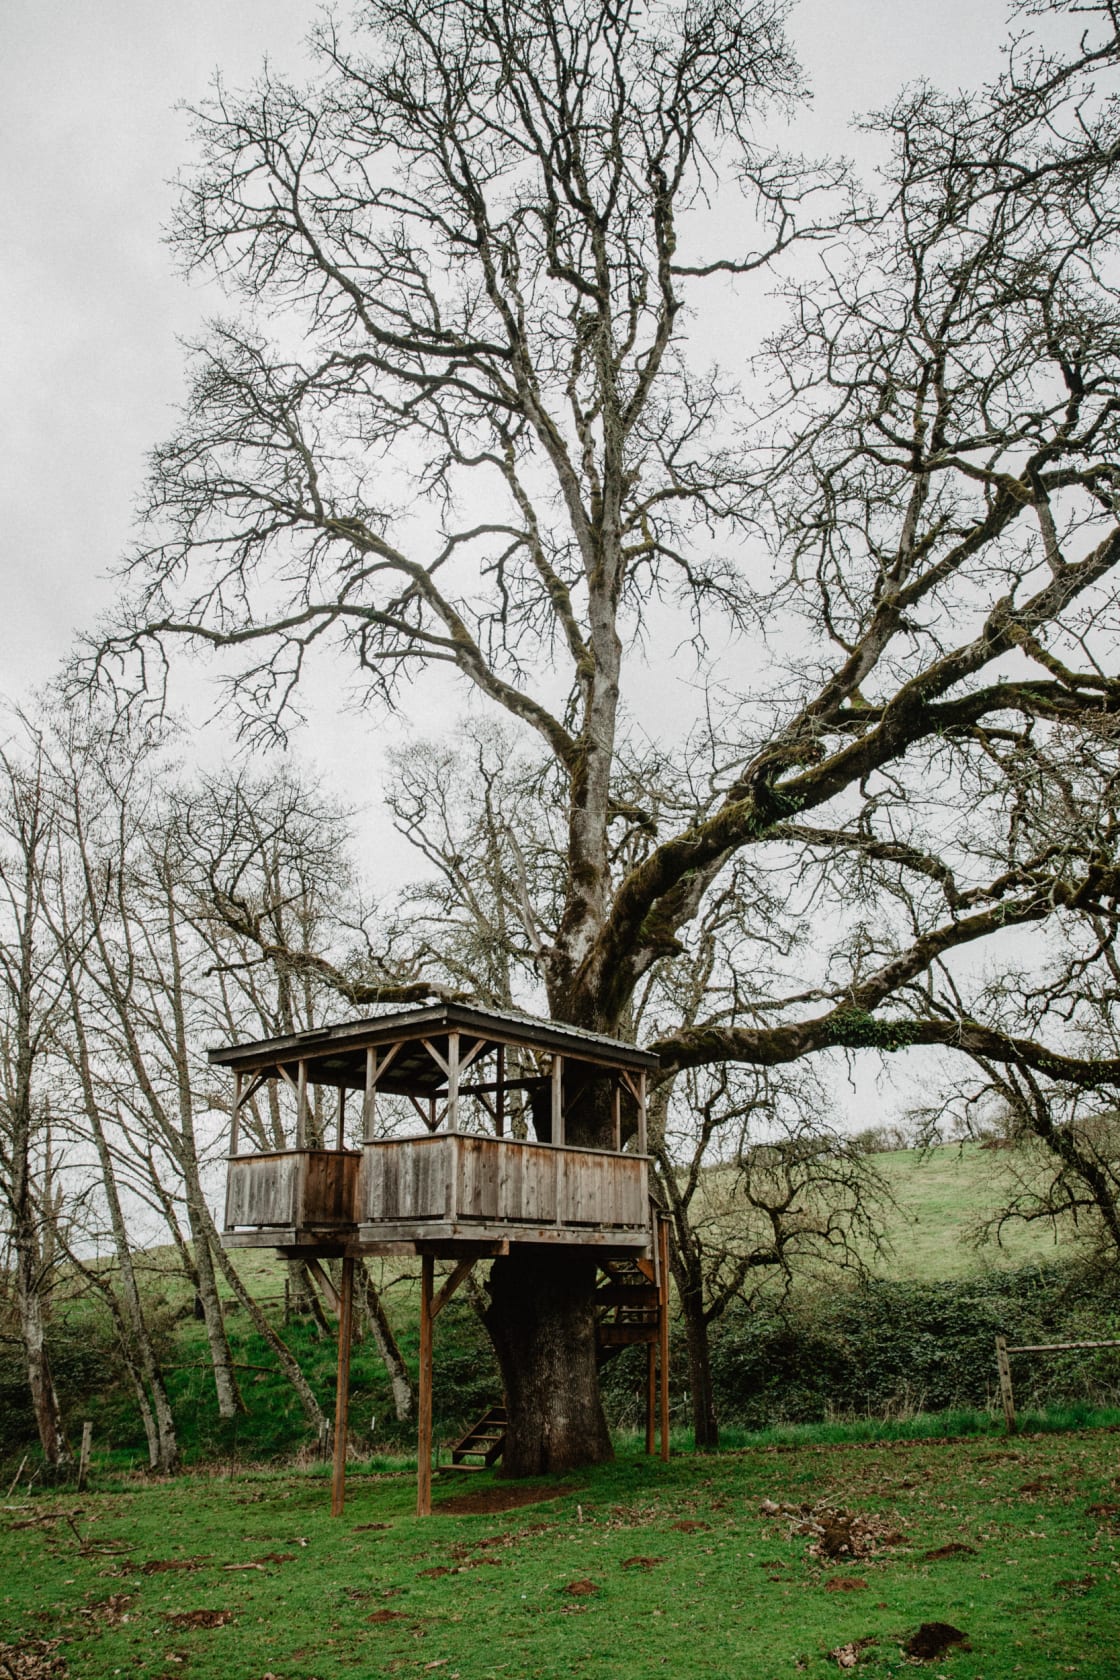 This treehouse is so cool